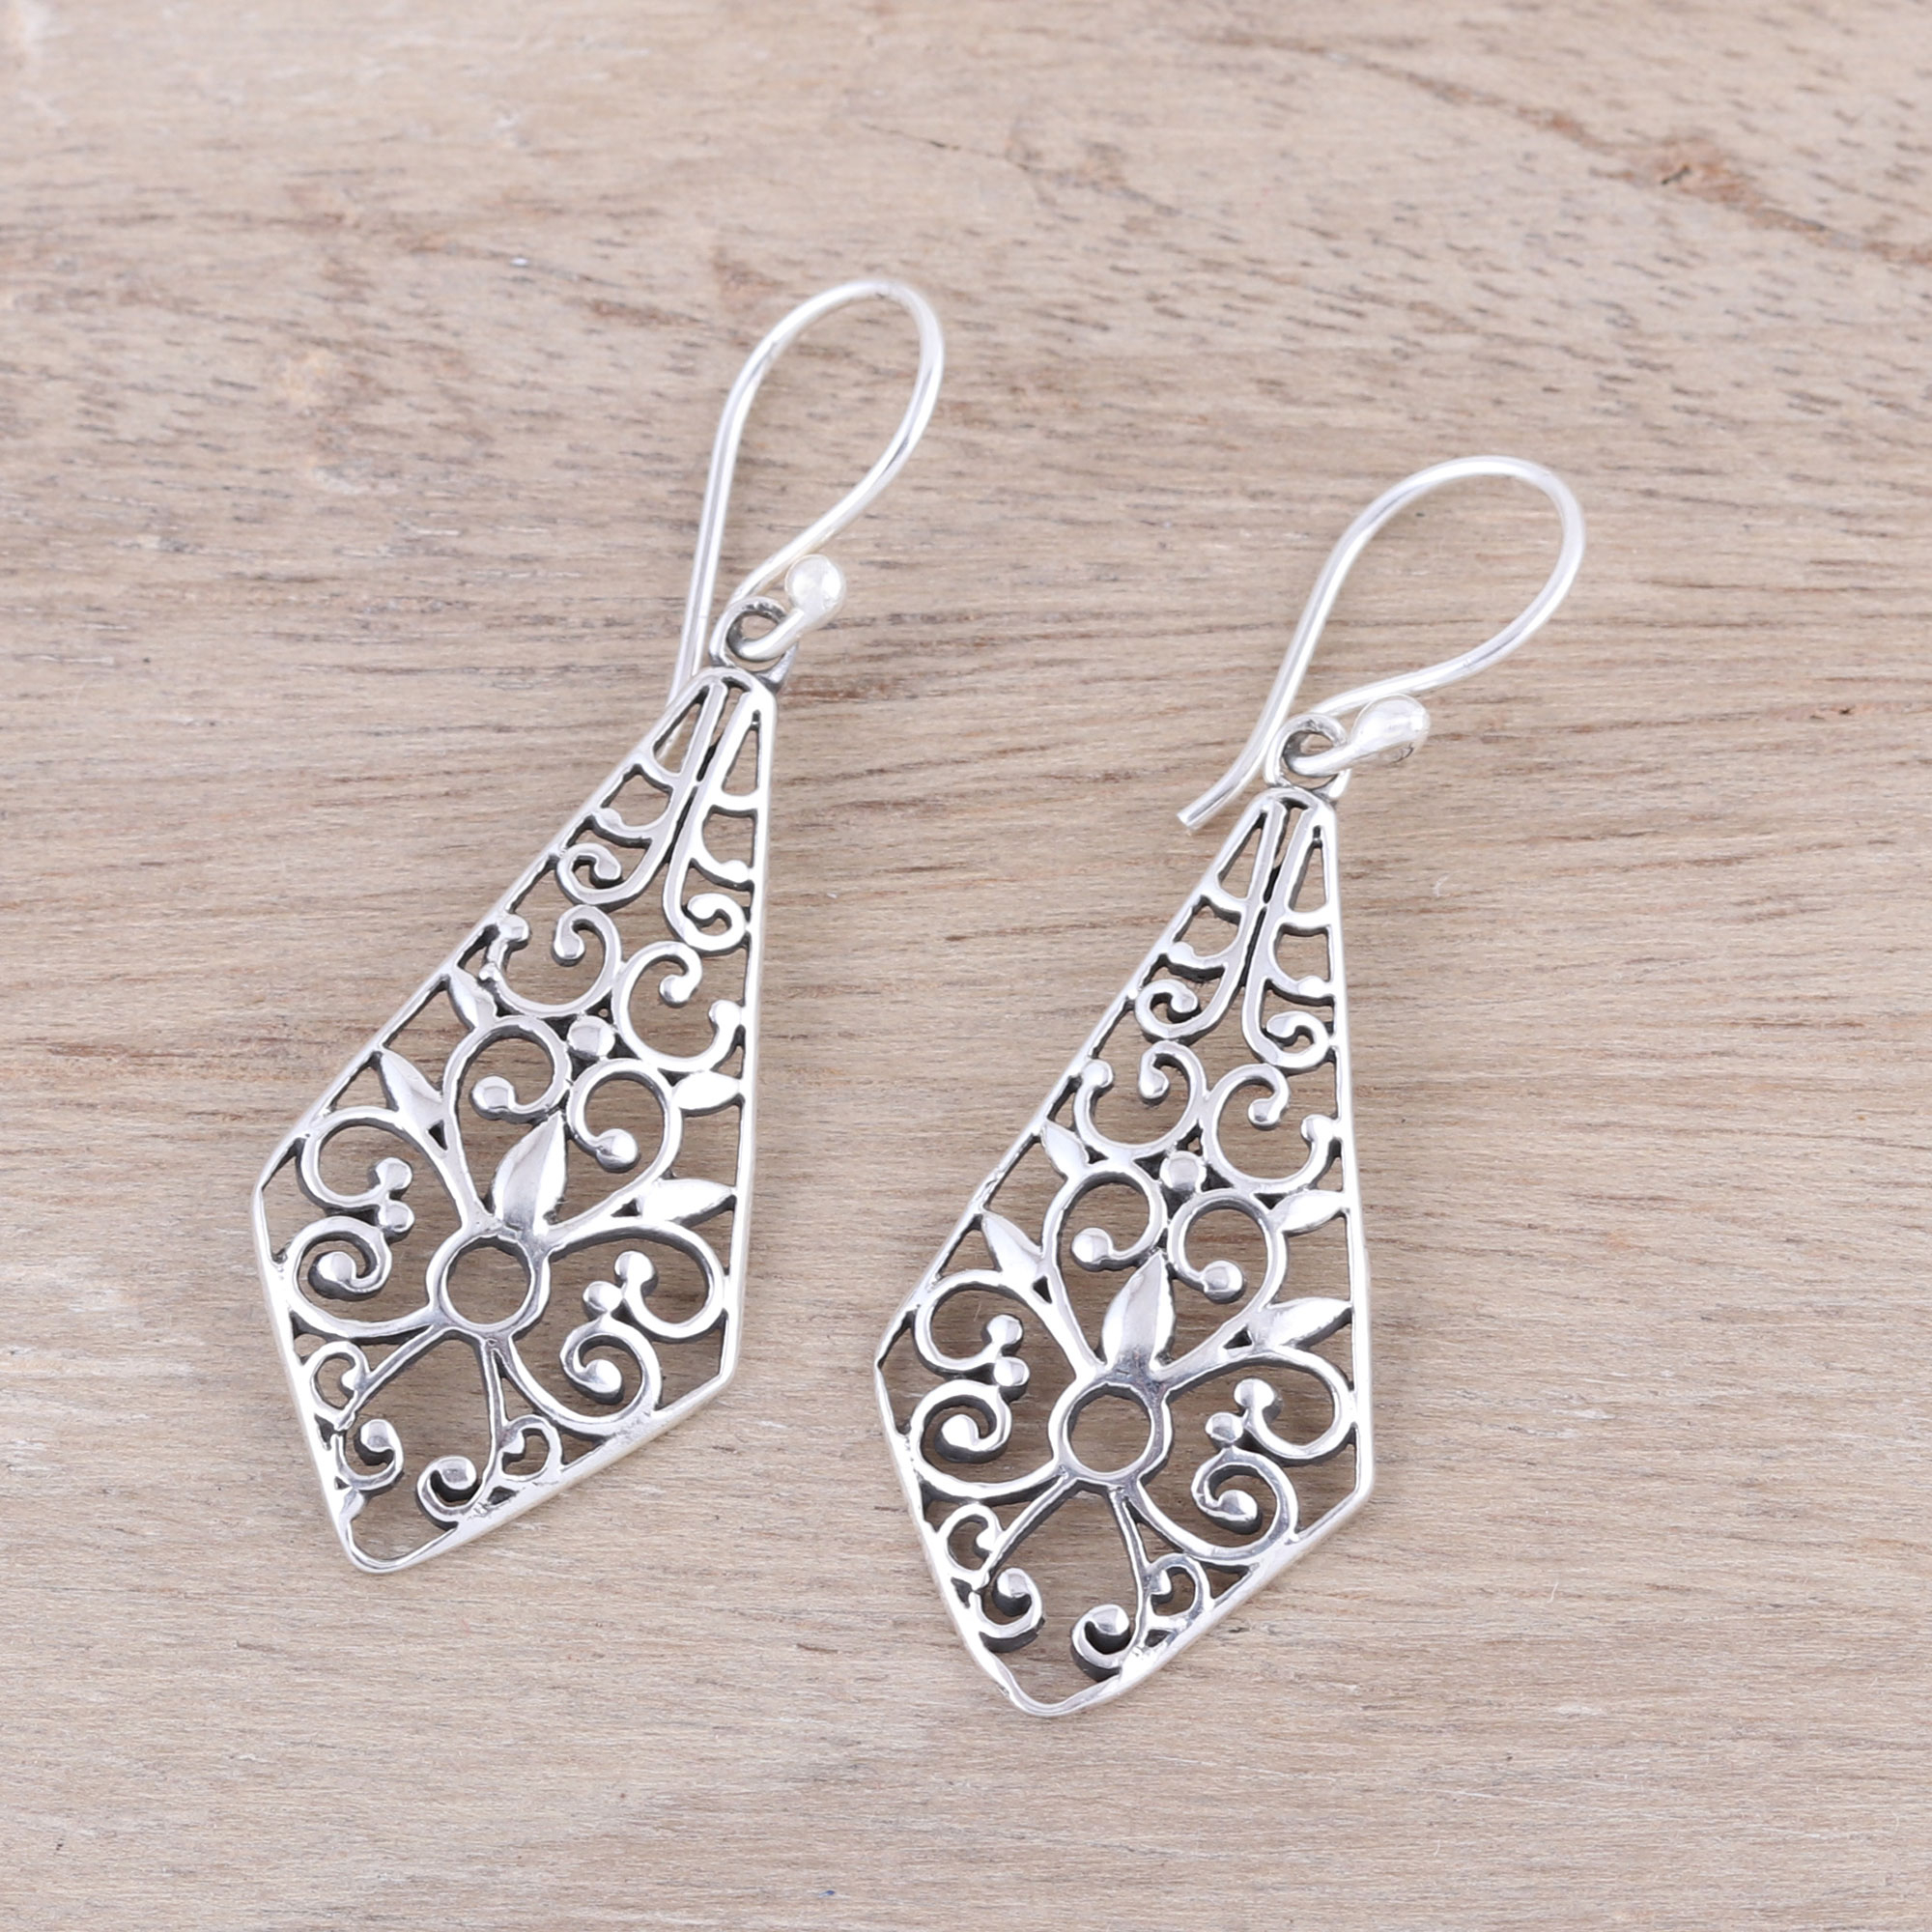 Kite-Shaped Sterling Silver Dangle Earrings from India - Delightful ...